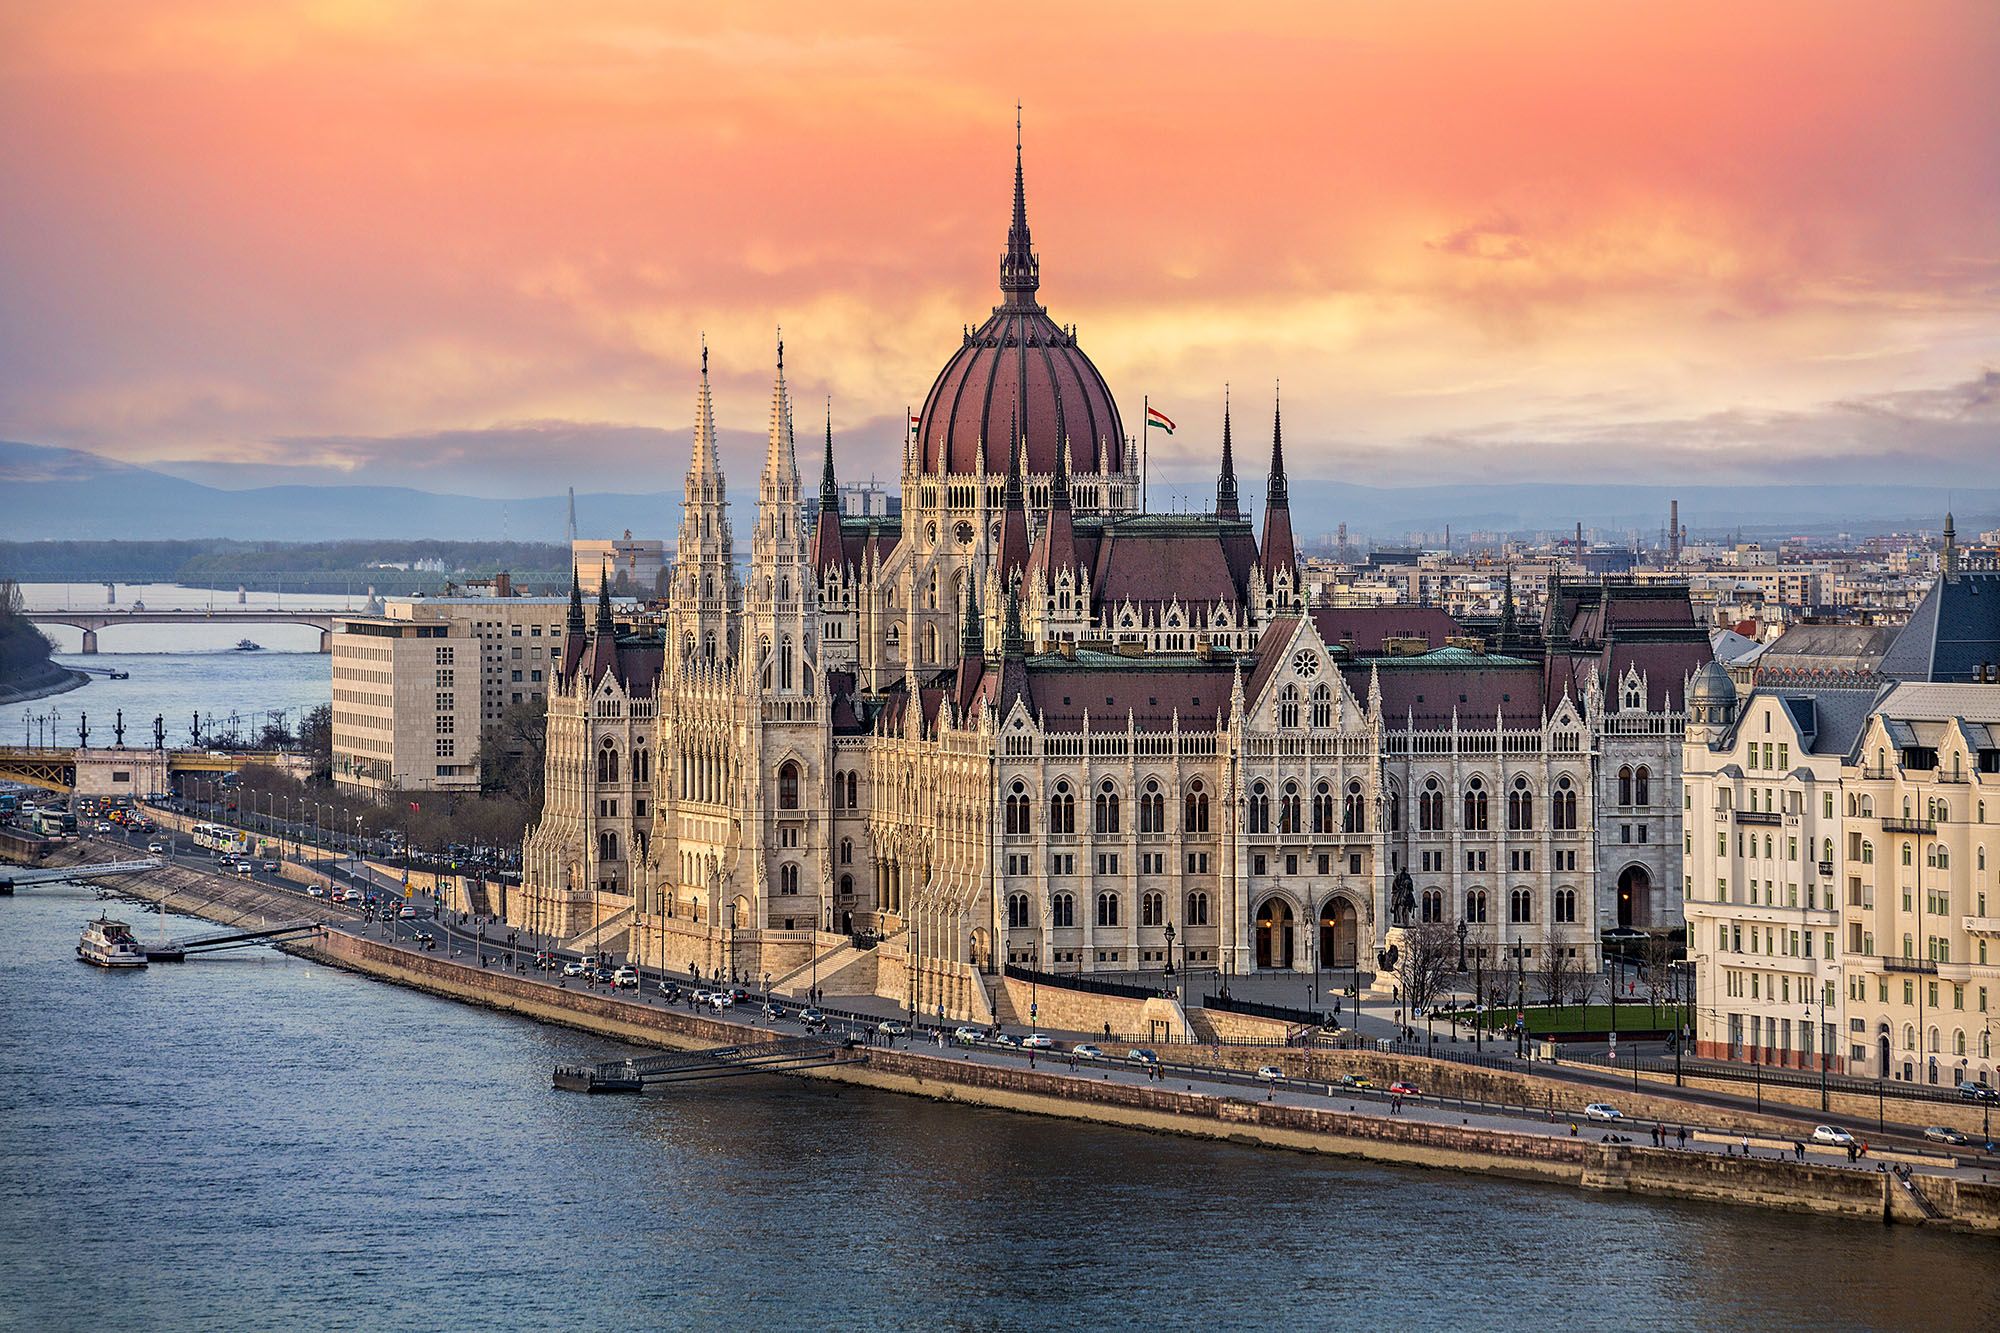 The Hungarian Parliament on the Danube River at Sunset in Budapest, Hungary